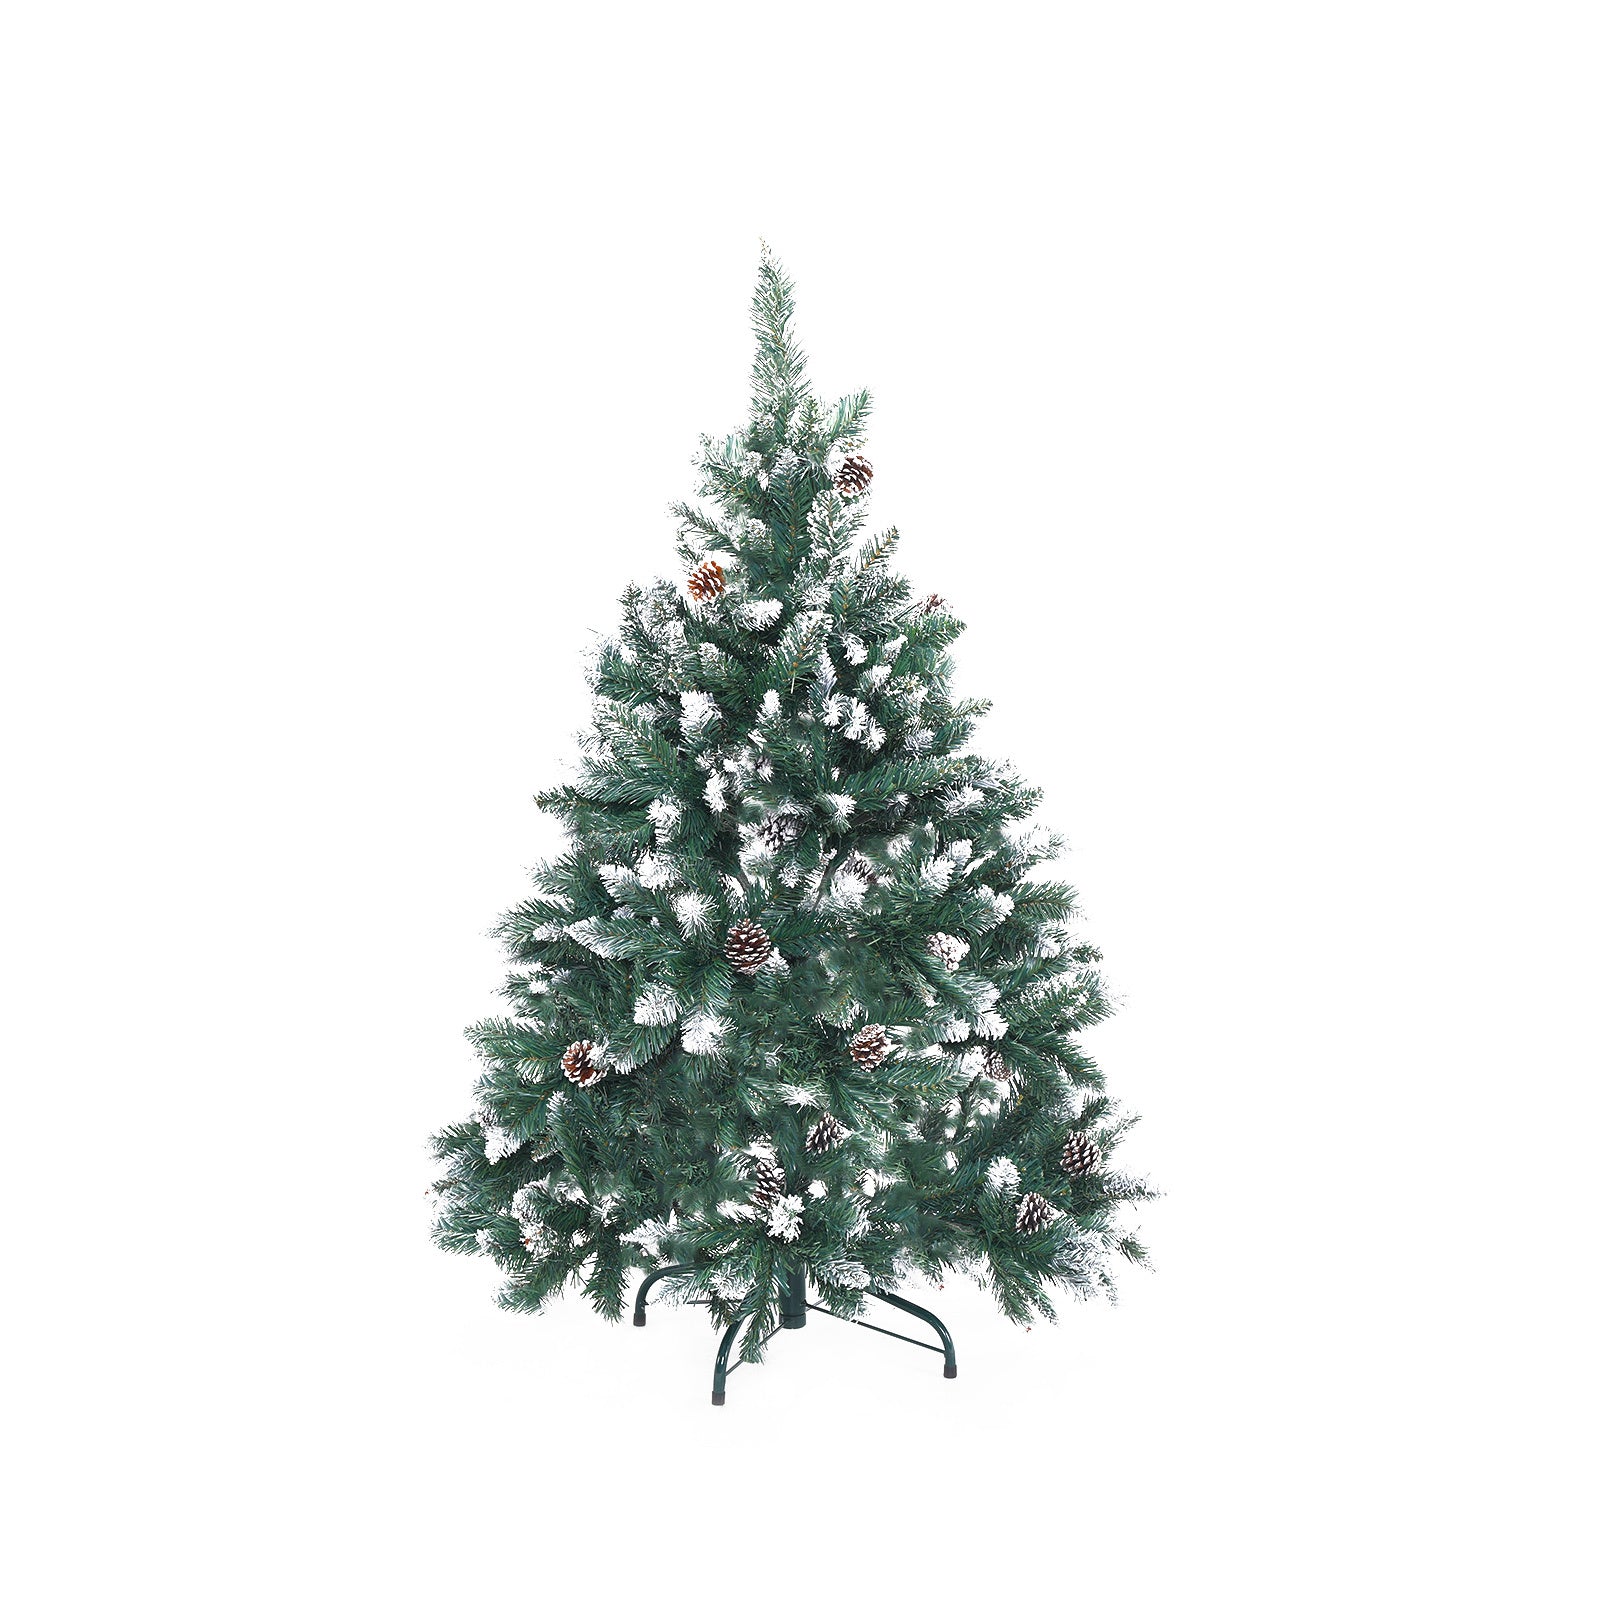 Home Ready 4Ft 120cm 390 tips Green Snowy Christmas Tree Xmas Pine Cones Deals499